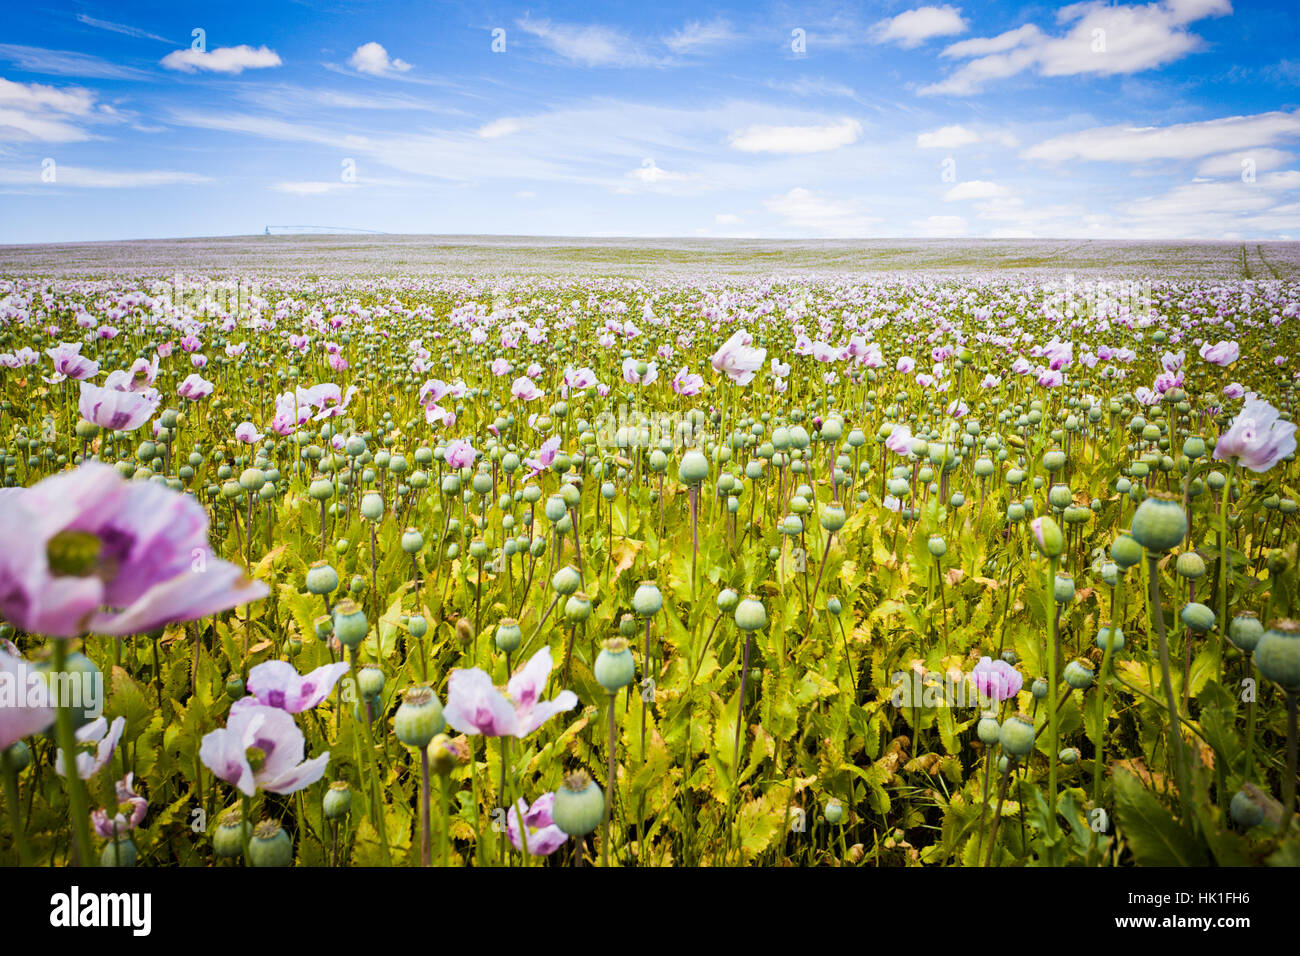 bloom, blossom, flourish, flourishing, agriculture, farming, aster, blooming, Stock Photo